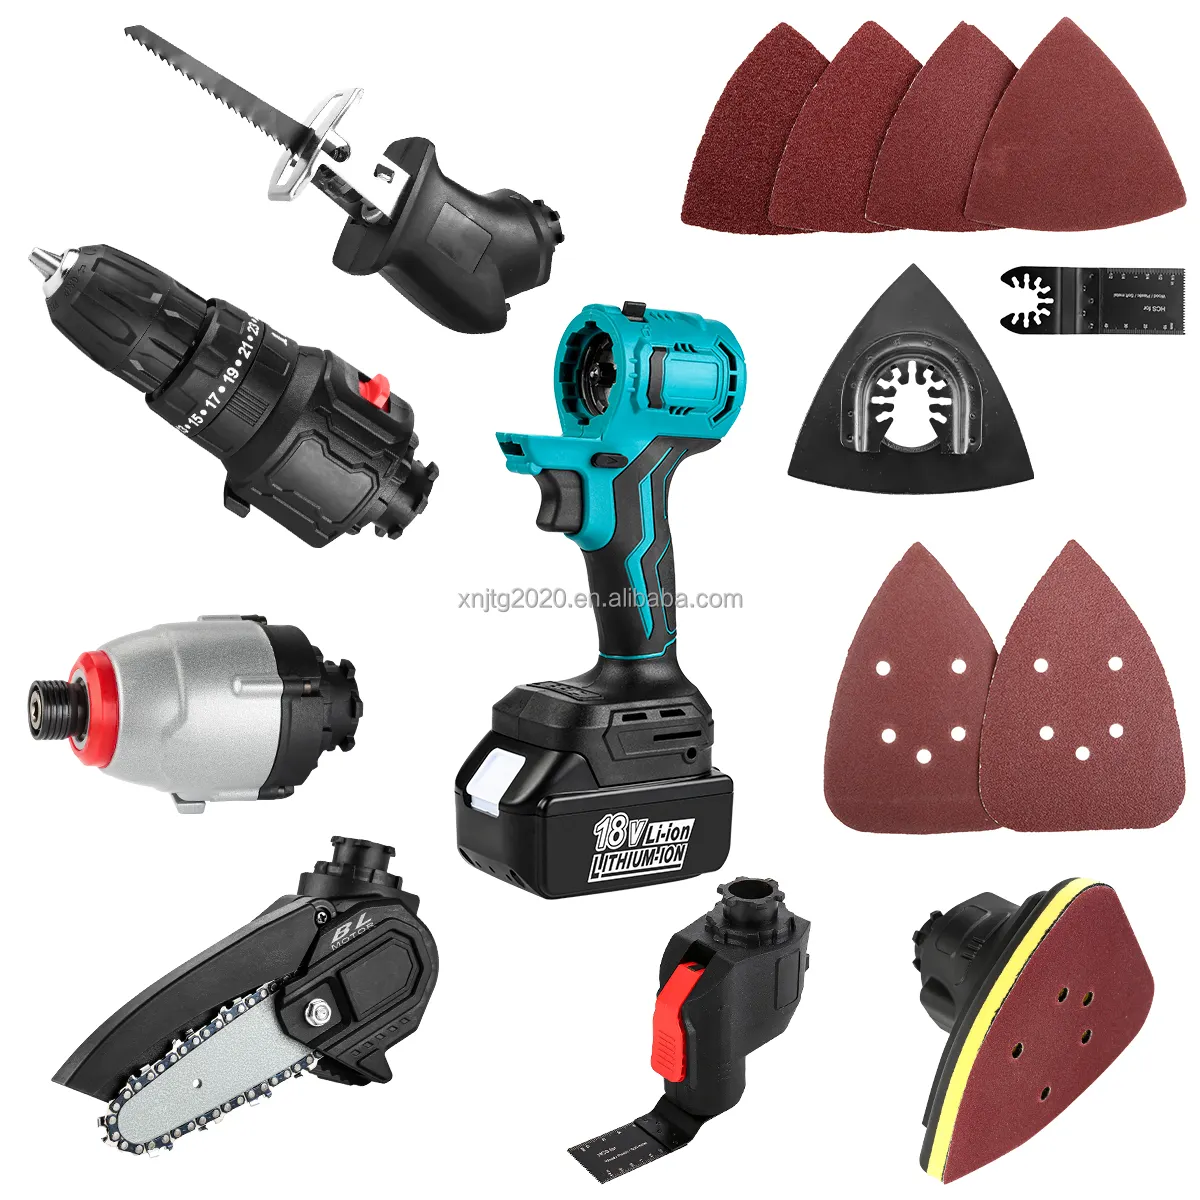 Power Tool Sets For Home Decoration Garden Crafts Herramienta Replacement for Makita Tool Sets